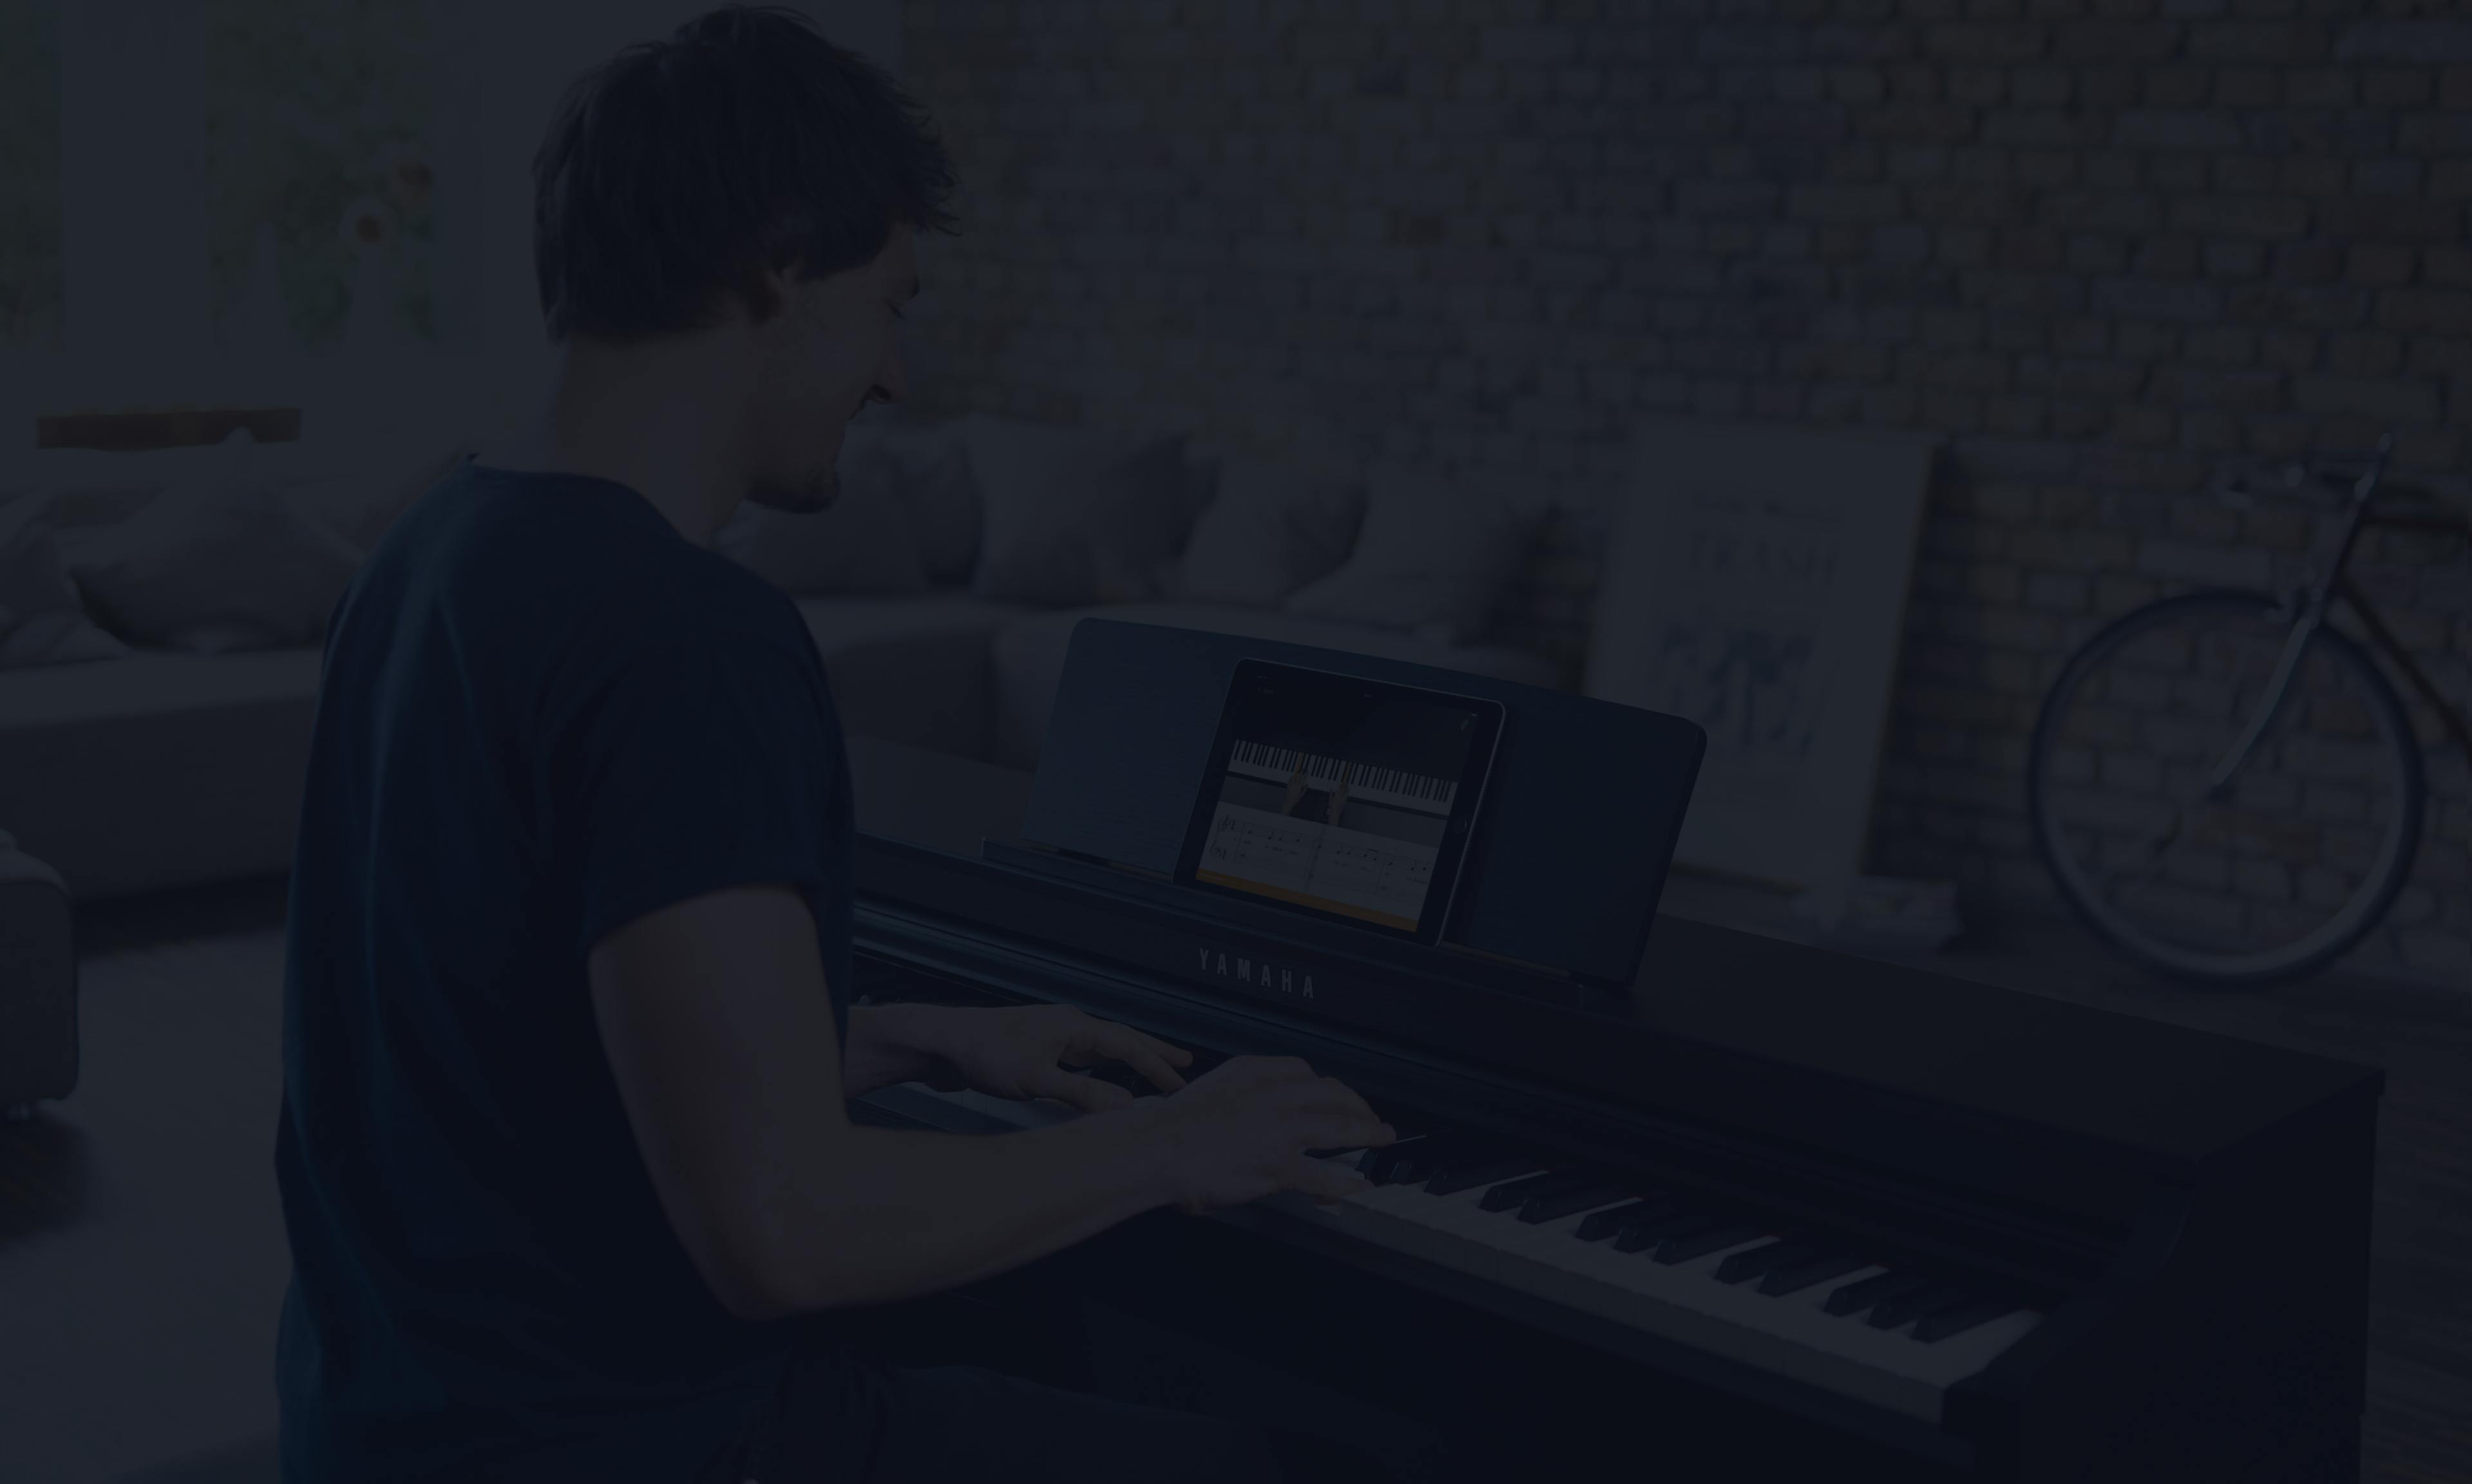 You can now use VR to learn piano for free